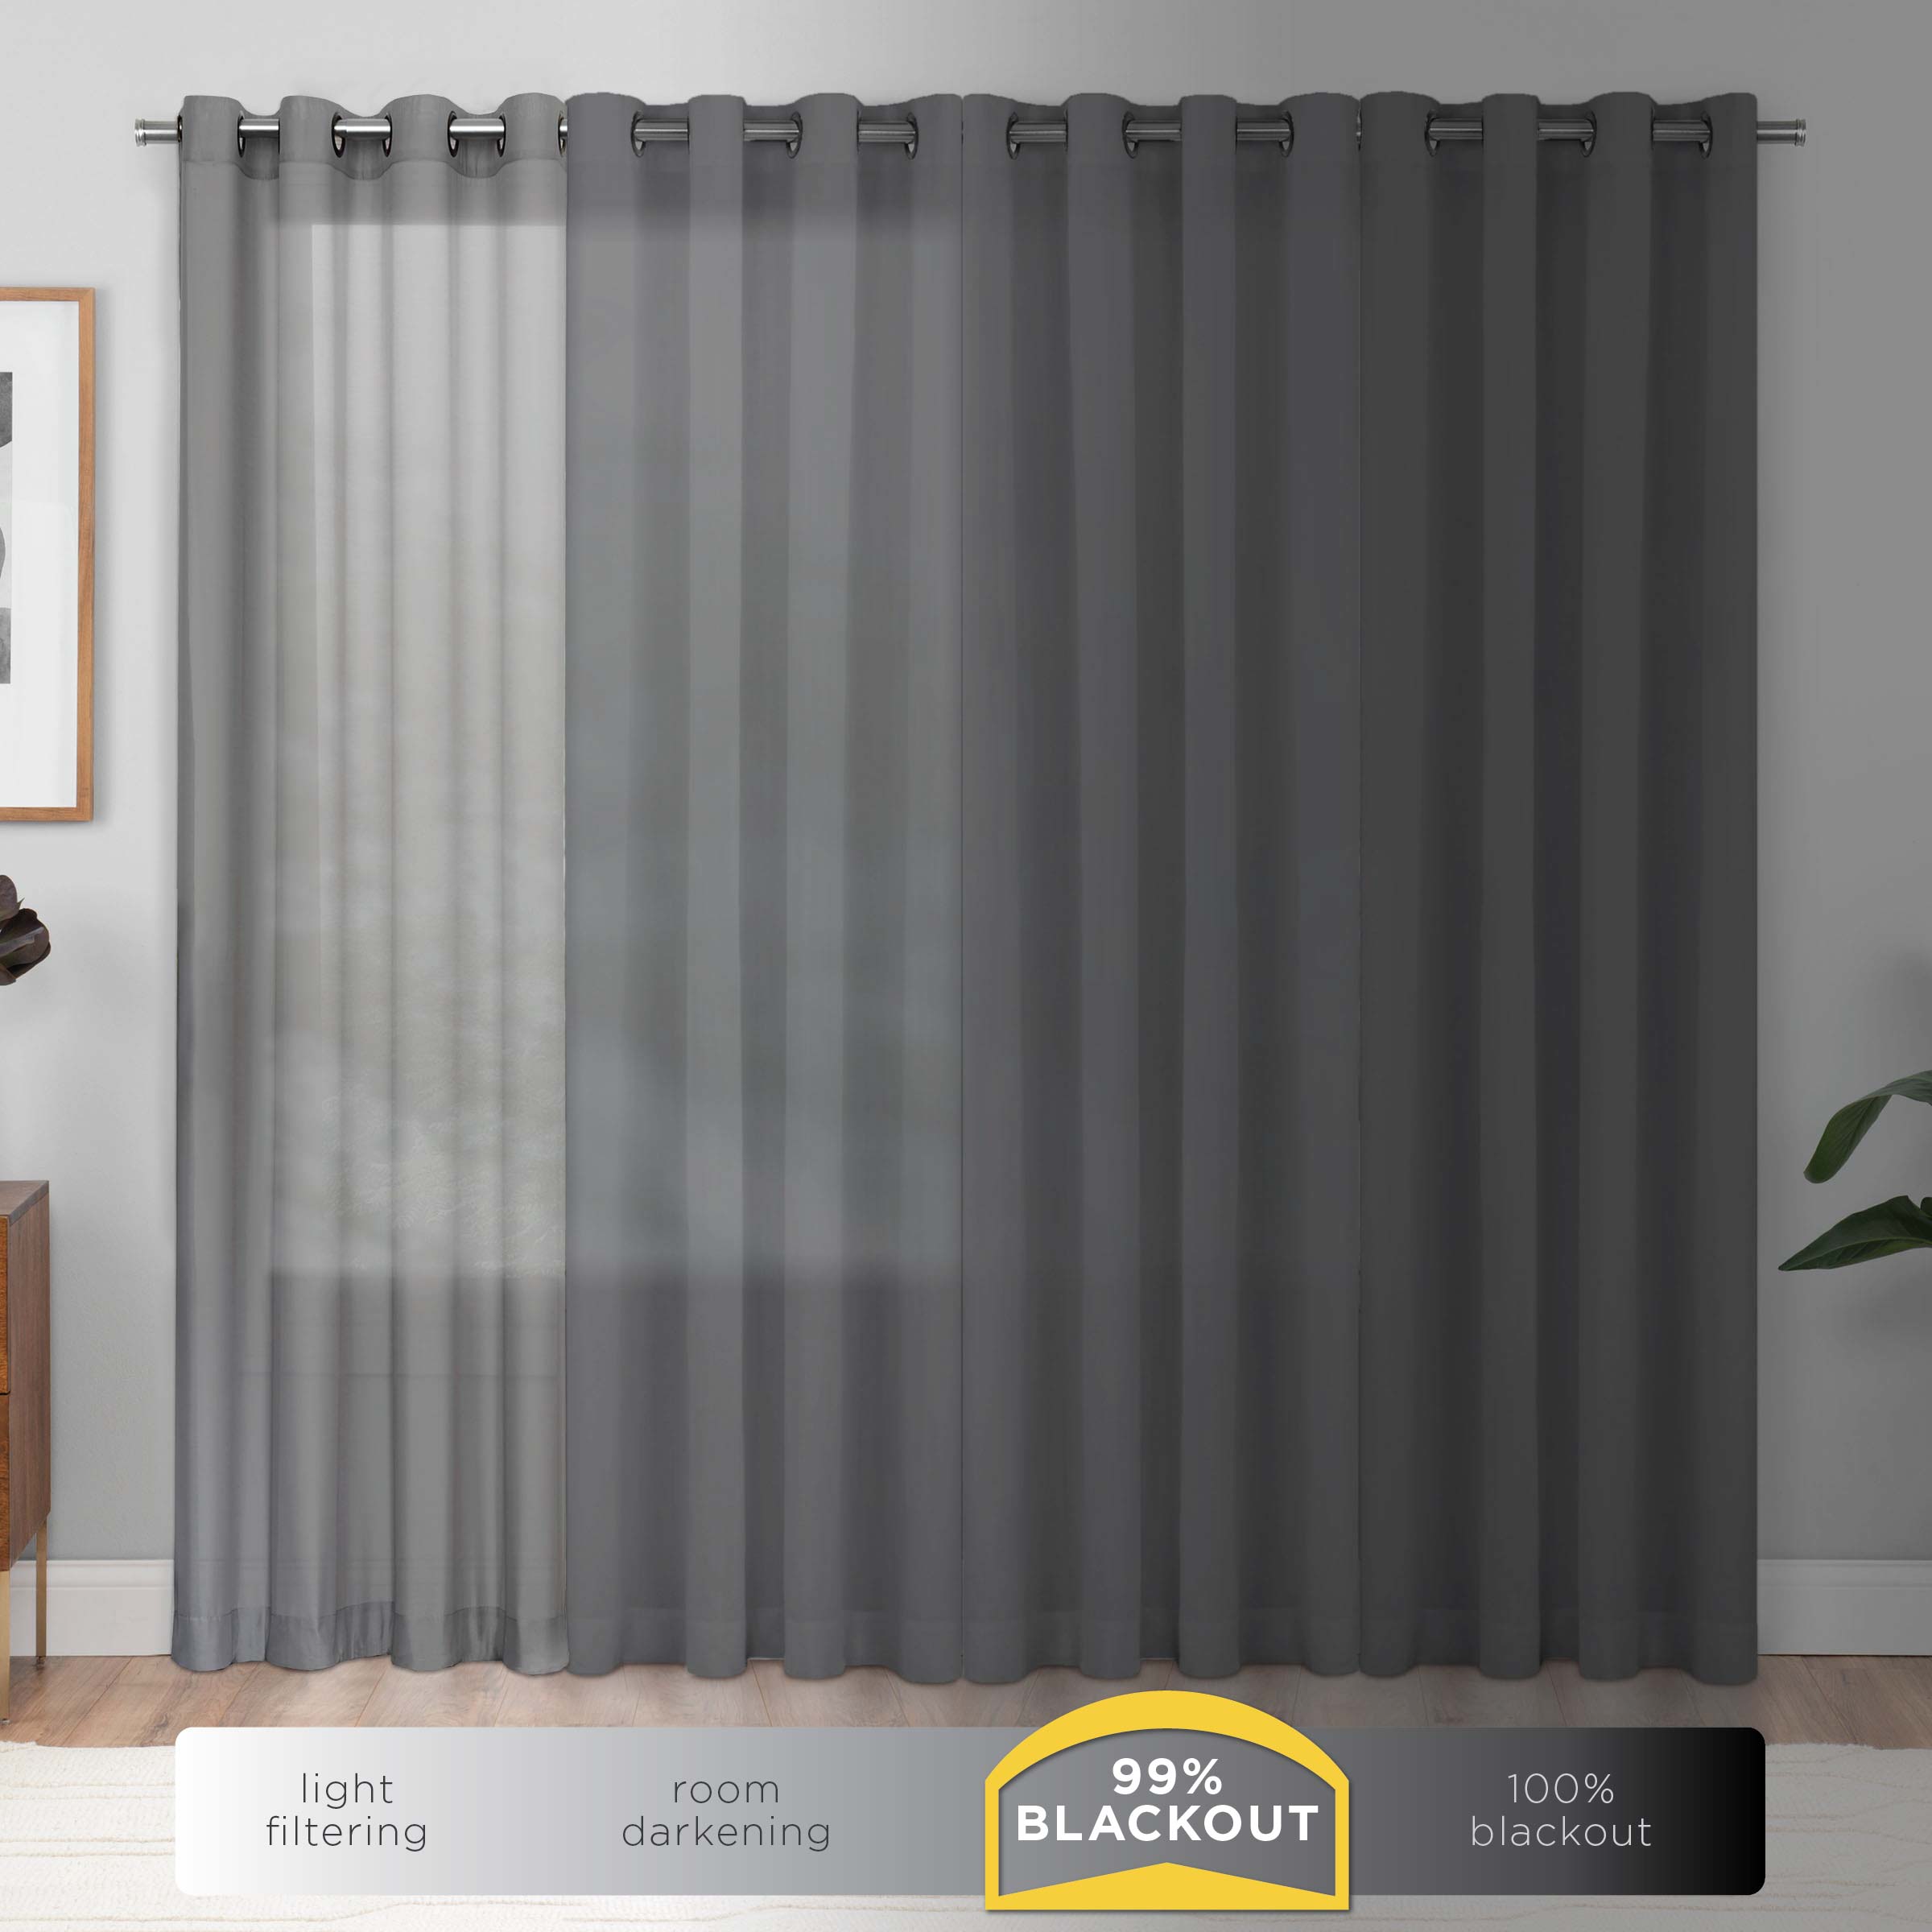 Eclipse Nottingham Blackout Grommet Top Single Curtain Panel, Red, 40 x 95 - image 2 of 3